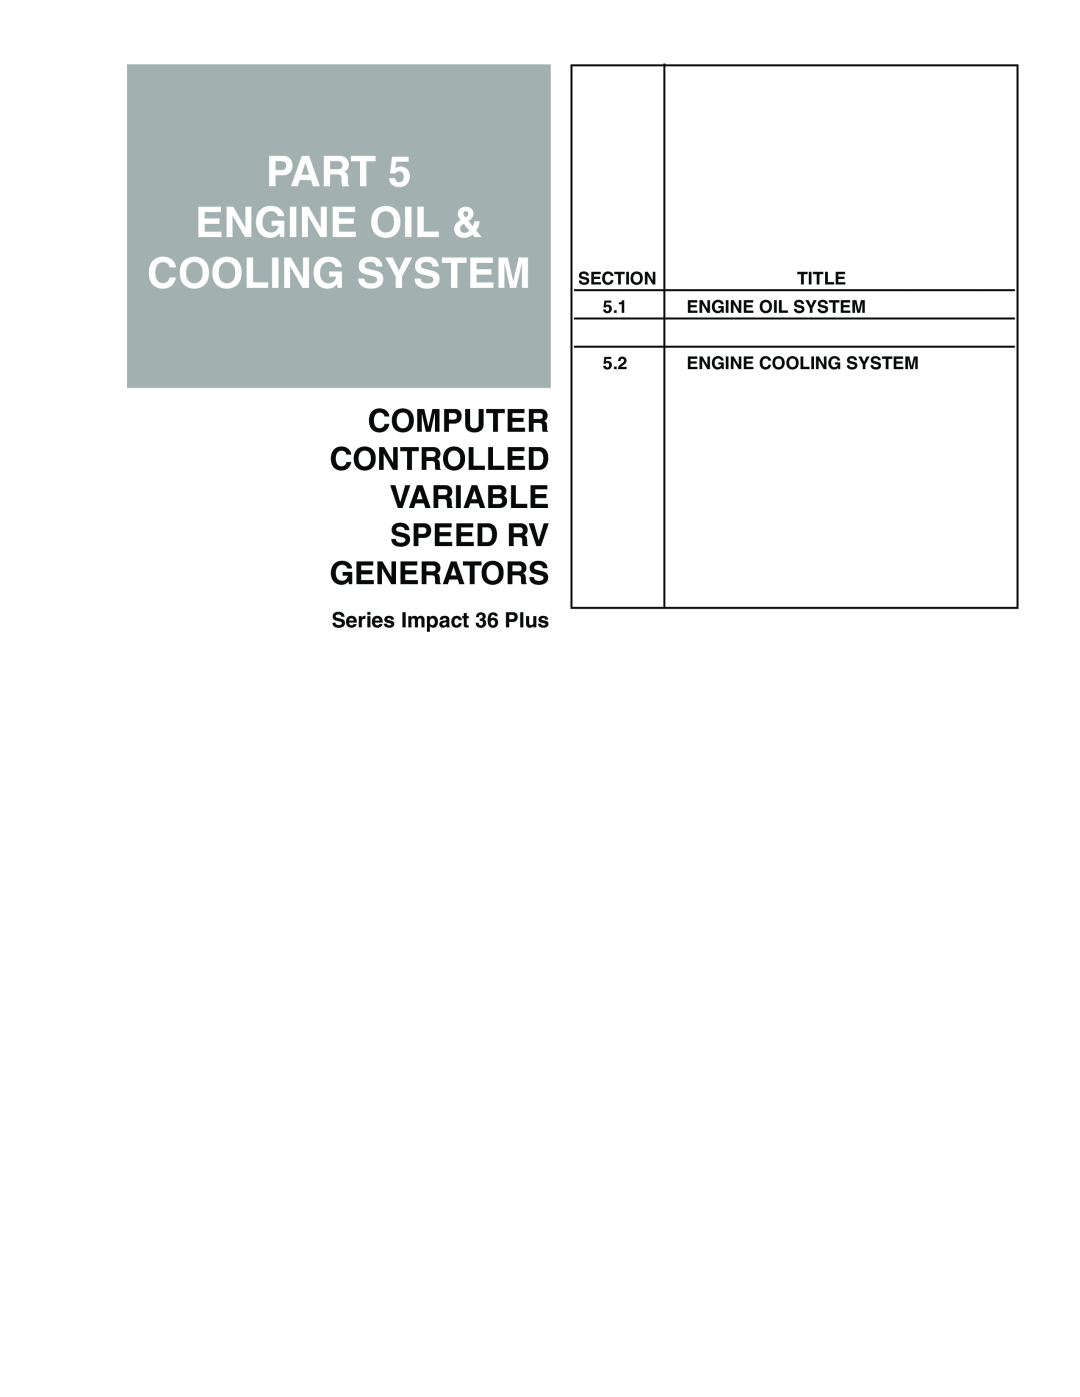 Generac Power Systems 941-2 Part Engine Oil Cooling System, ENGINE OIL SYSTEM 5.2 ENGINE COOLING SYSTEM, Section, Title 